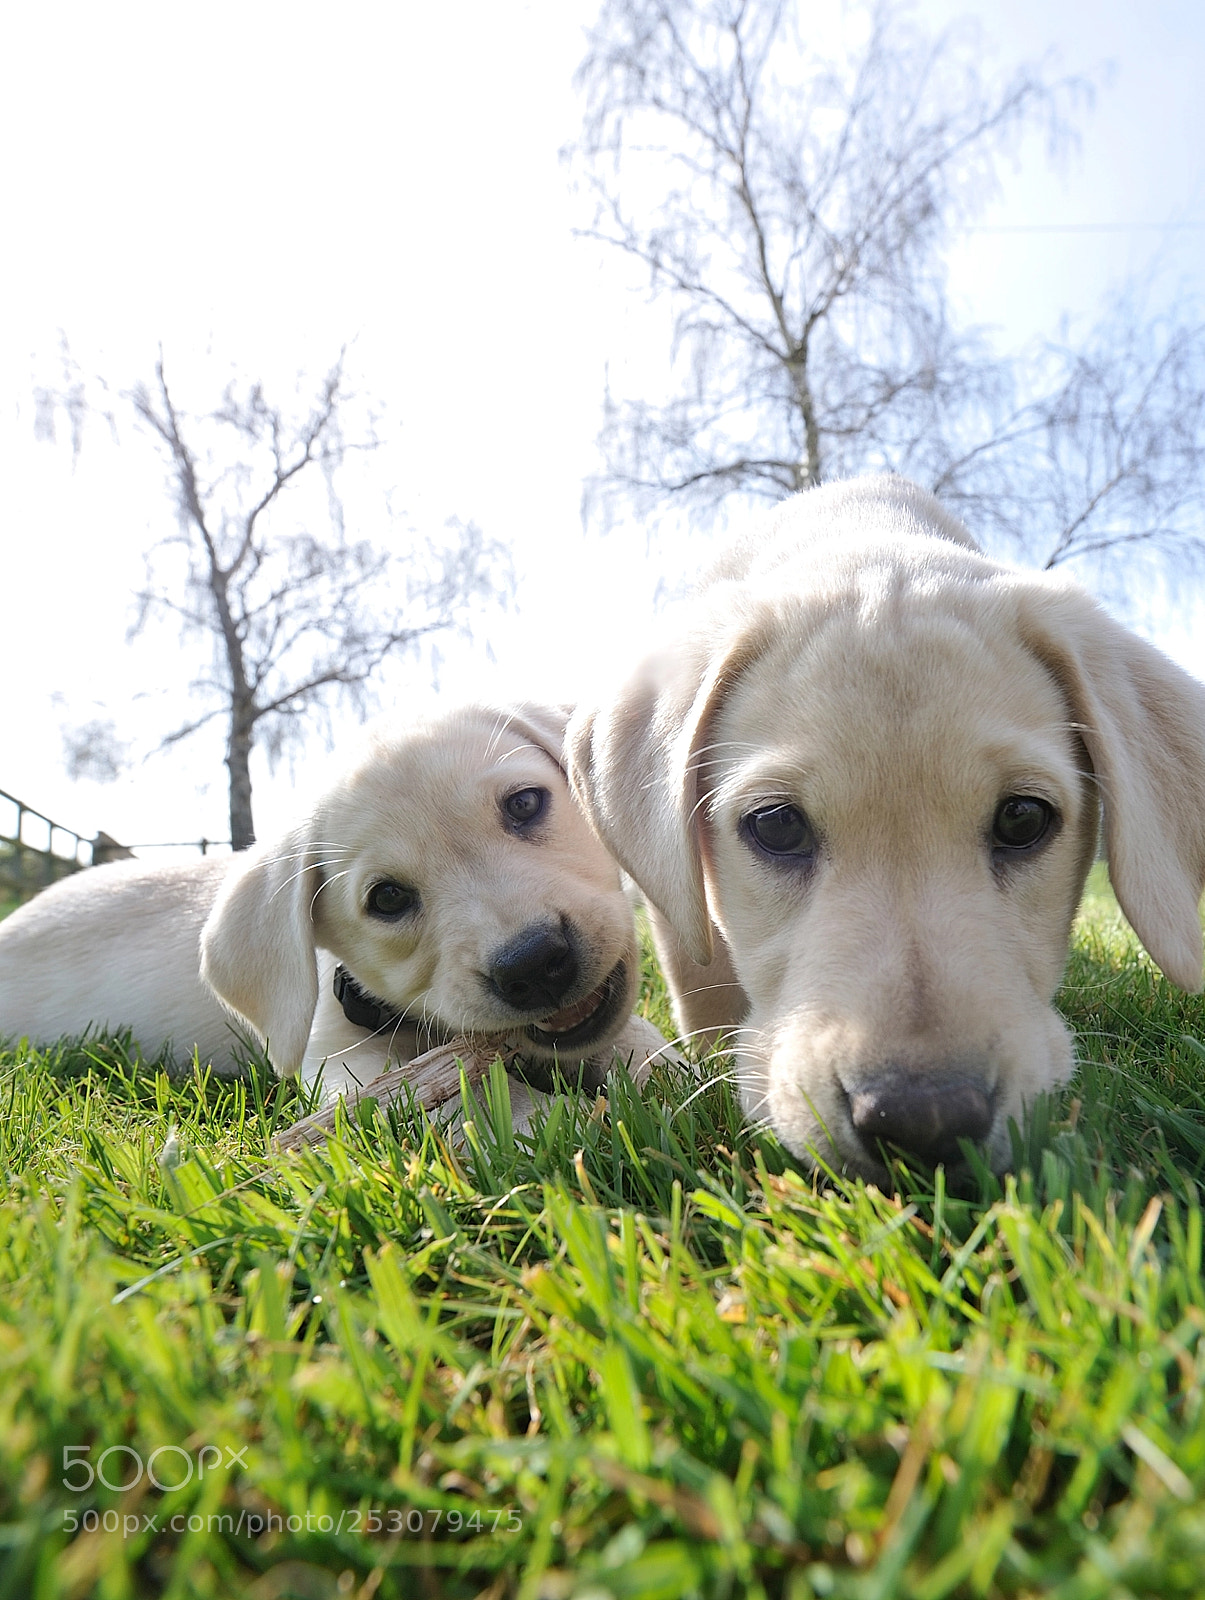 Nikon D3 sample photo. Cute puppies in the photography